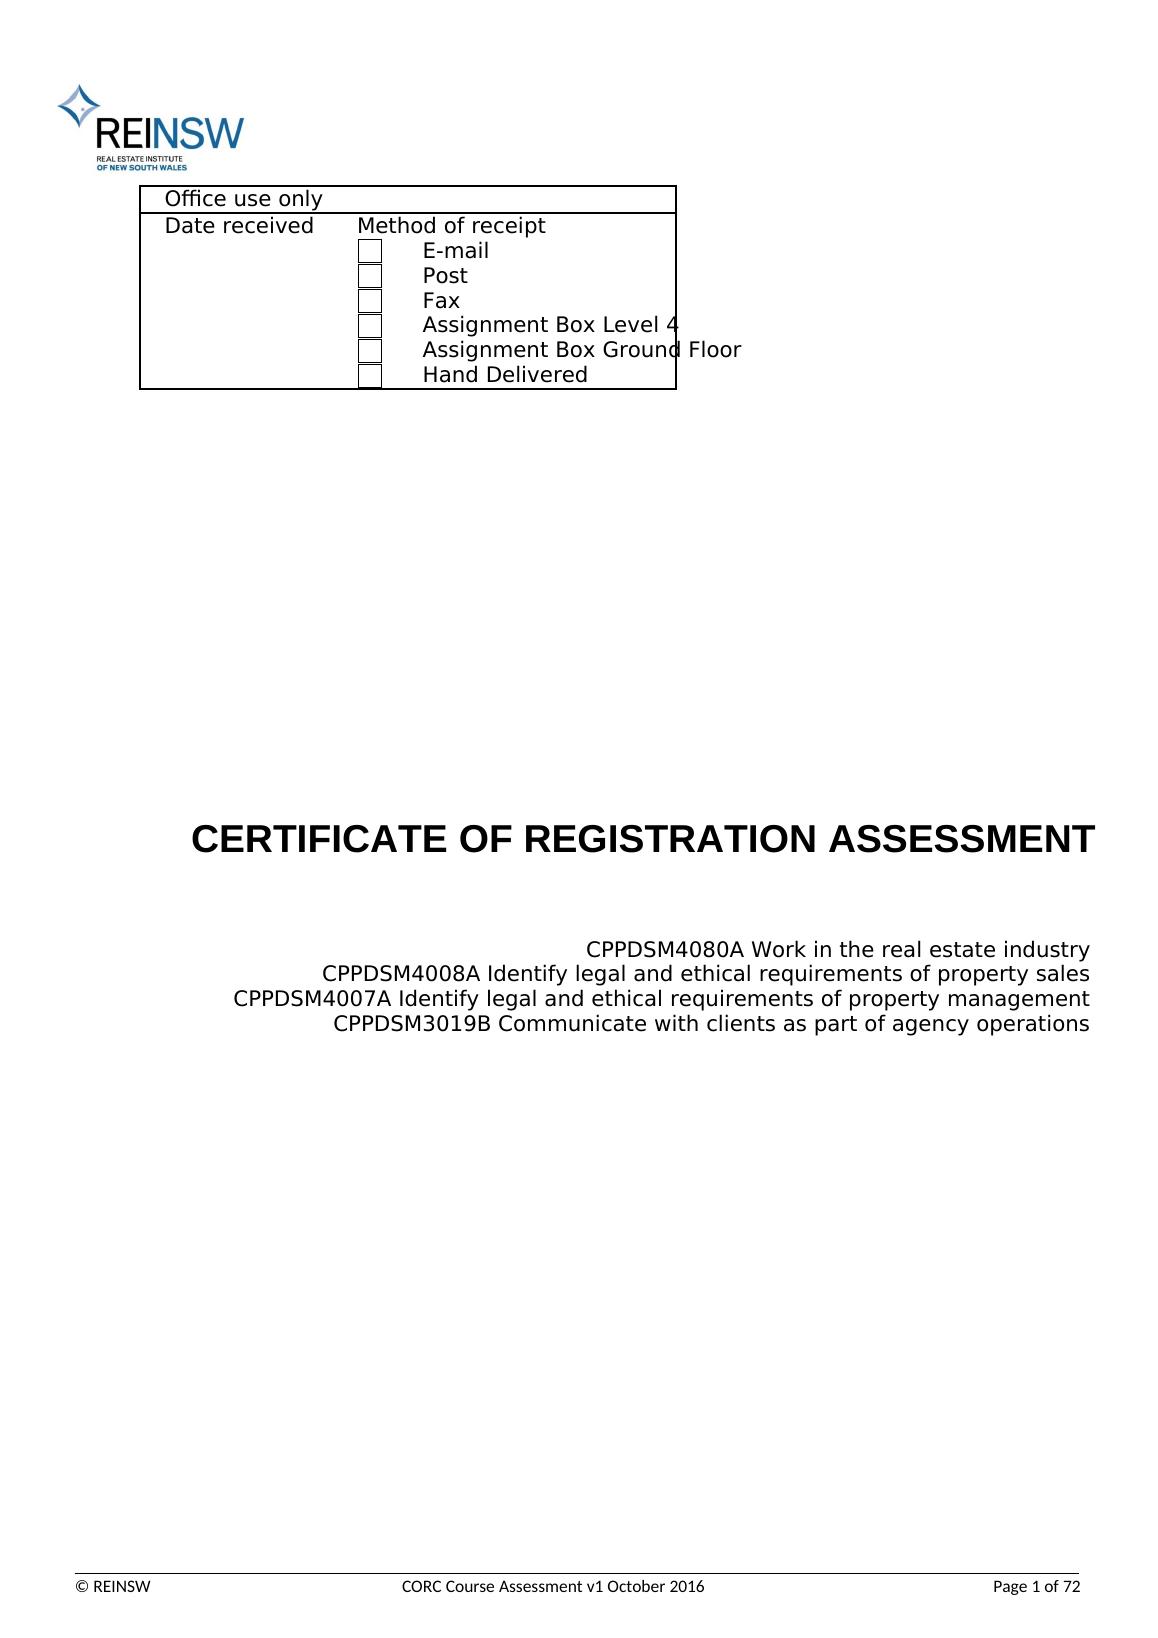 CPPDSM4080A Certificity of Registration ASSESSMENT Certification in Real Estate Industry_1